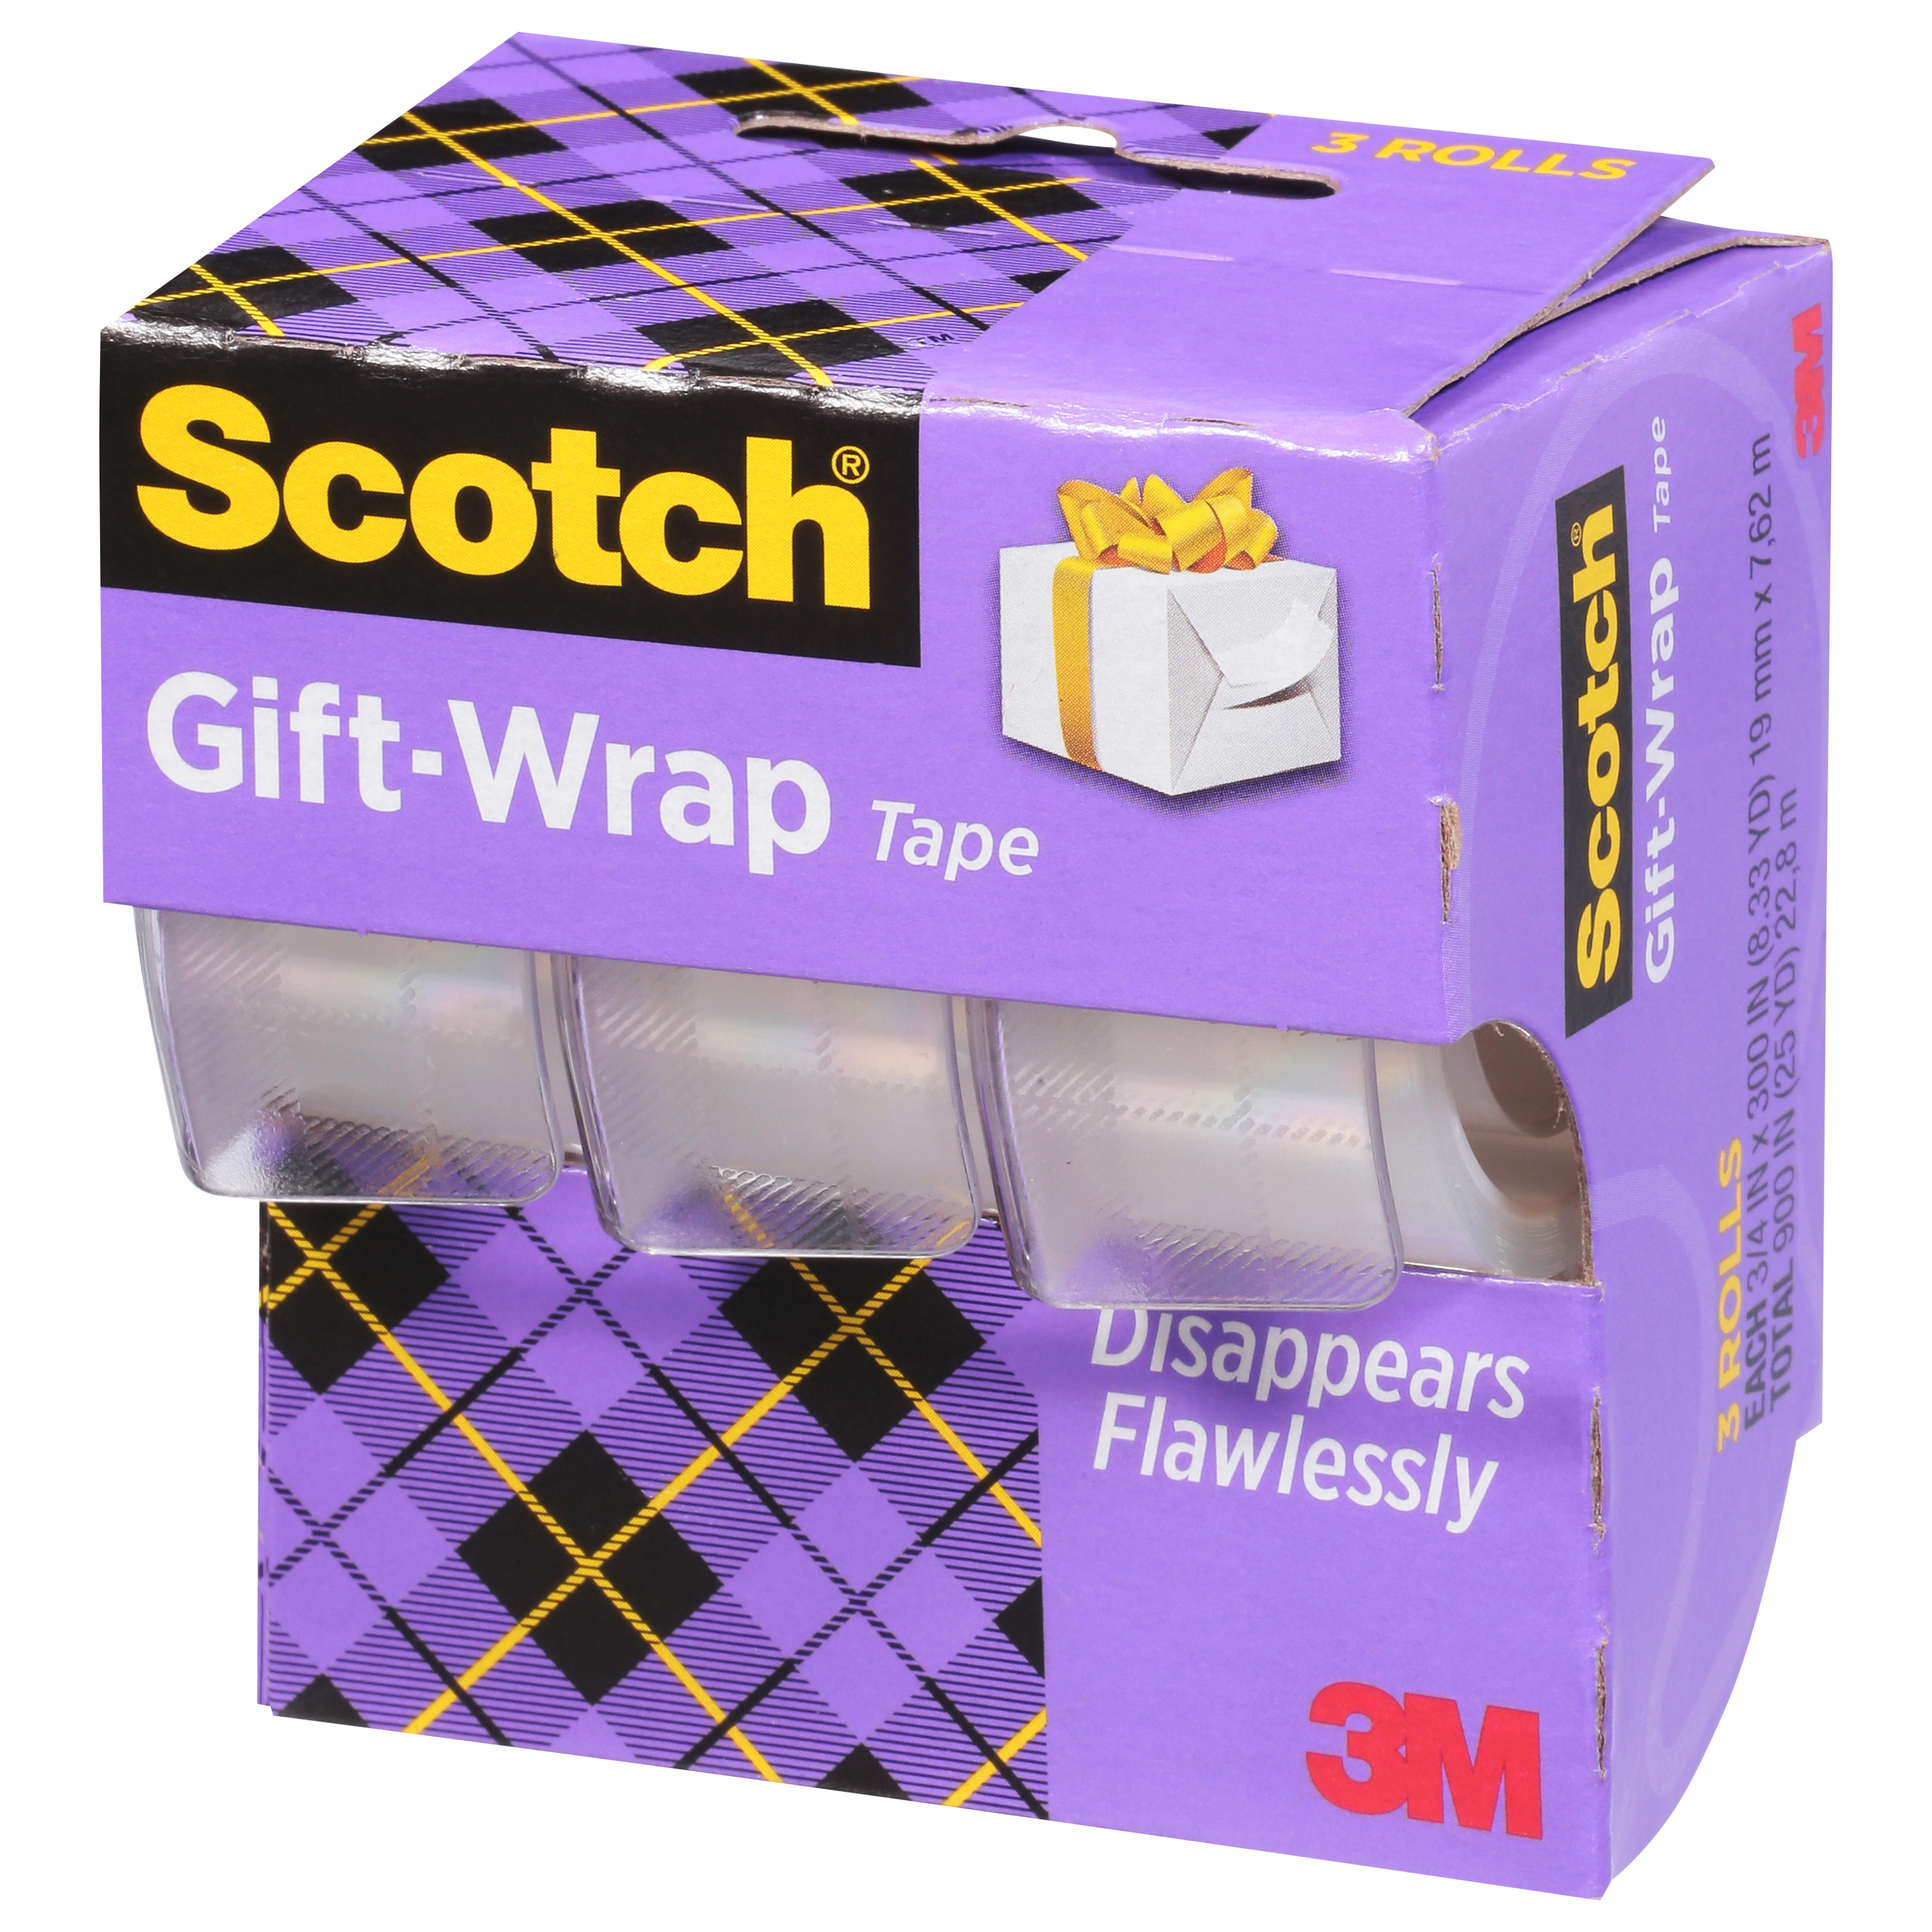 Save on 3M Scotch Tape Gift Wrap Satin Finish .75 X 300 Inch ea - 3 pk  Order Online Delivery